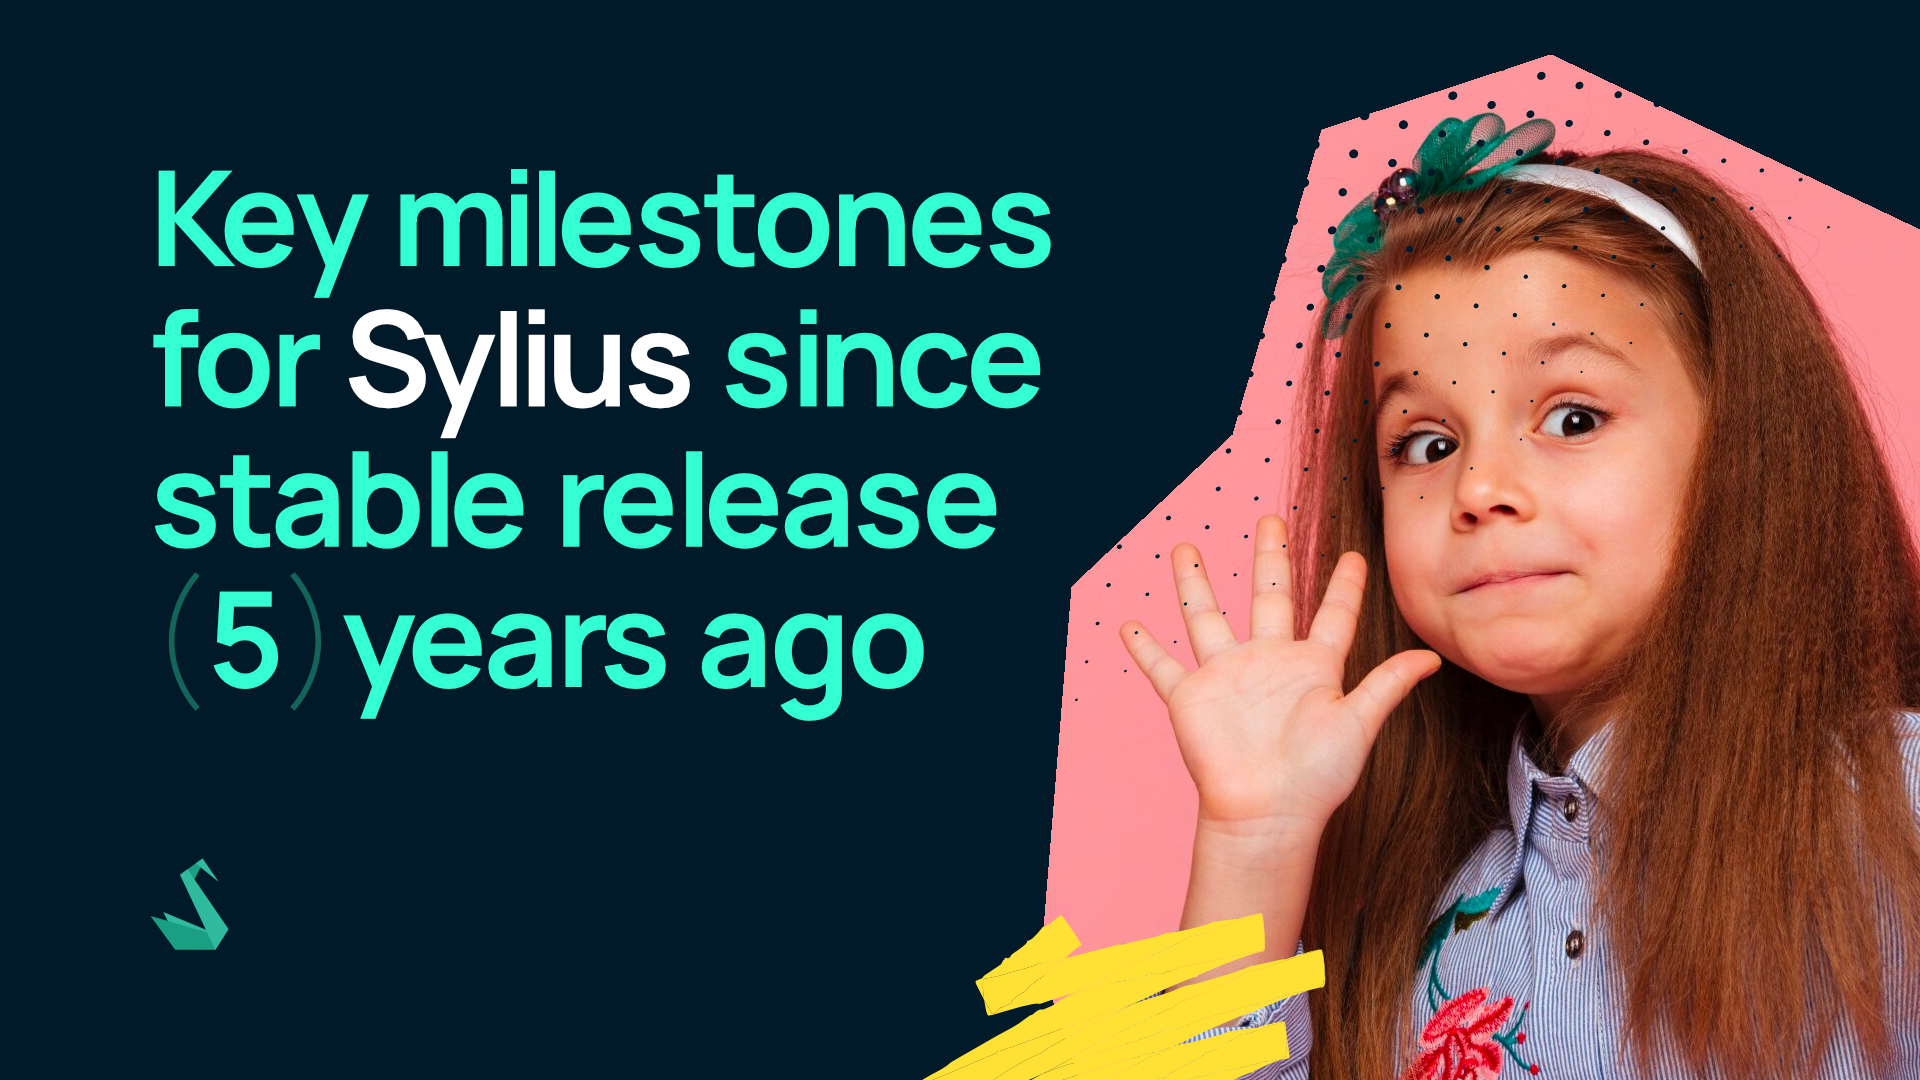 Key milestones for Sylius after the stable release 5 years ago